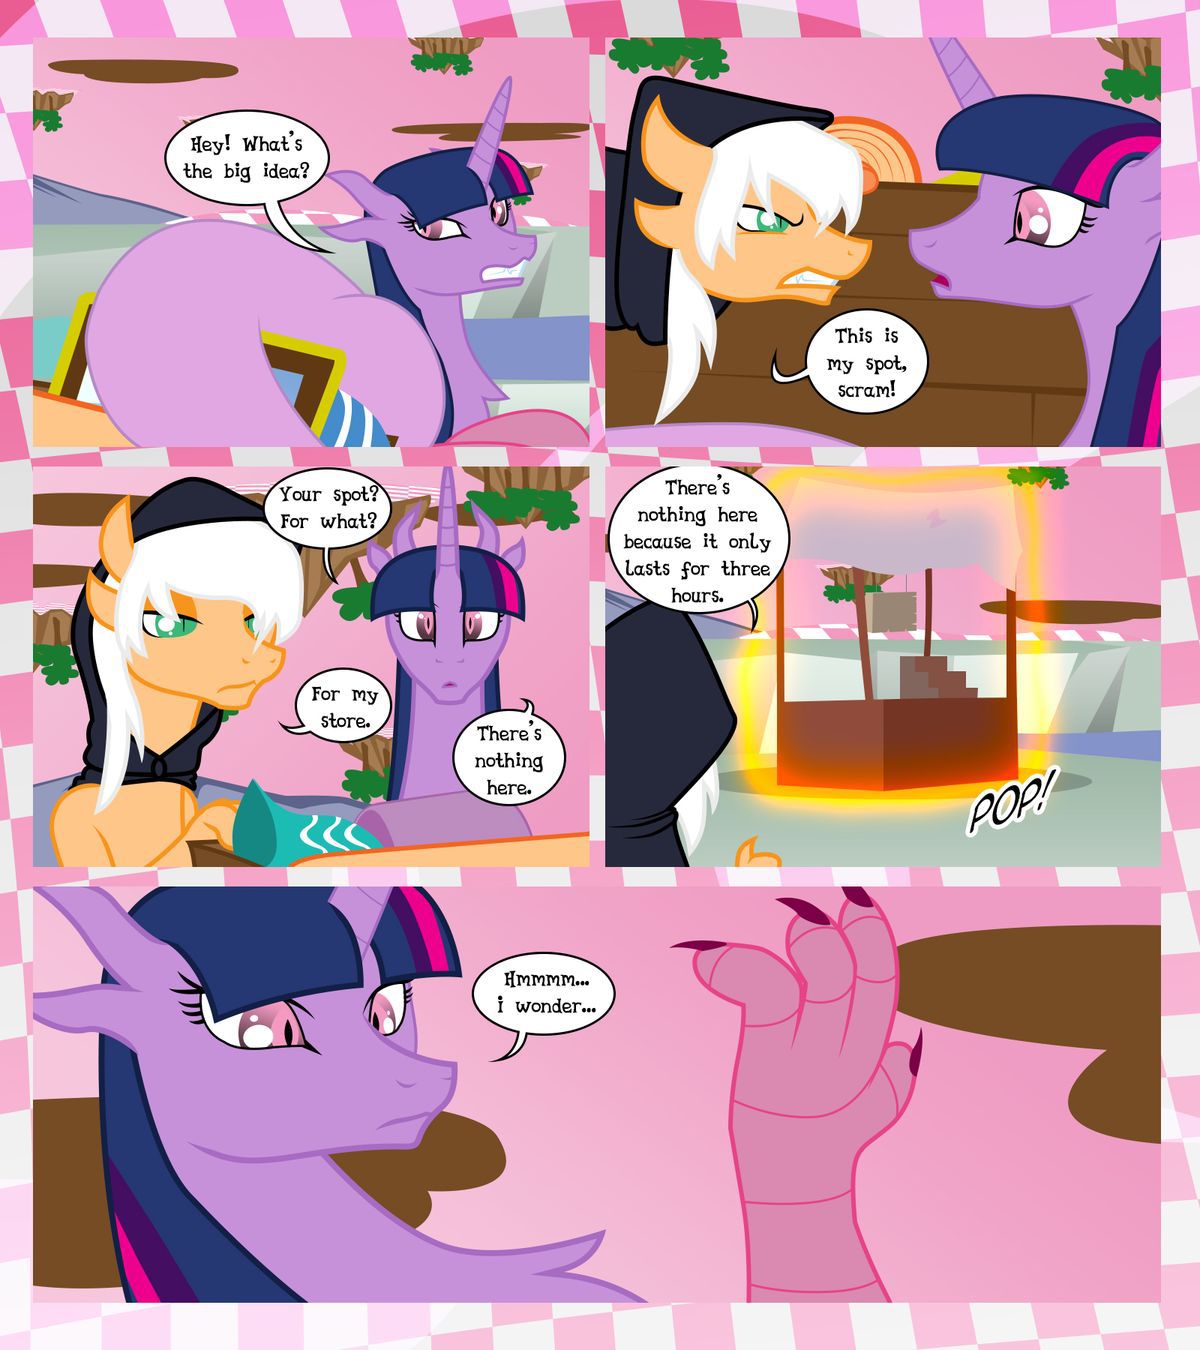 [GatesMcCloud] Cutie Mark Crusaders 10k: Chapter 3 - The Lost (My Little Pony: Friendship is Magic) [English] [Ongoing] 35